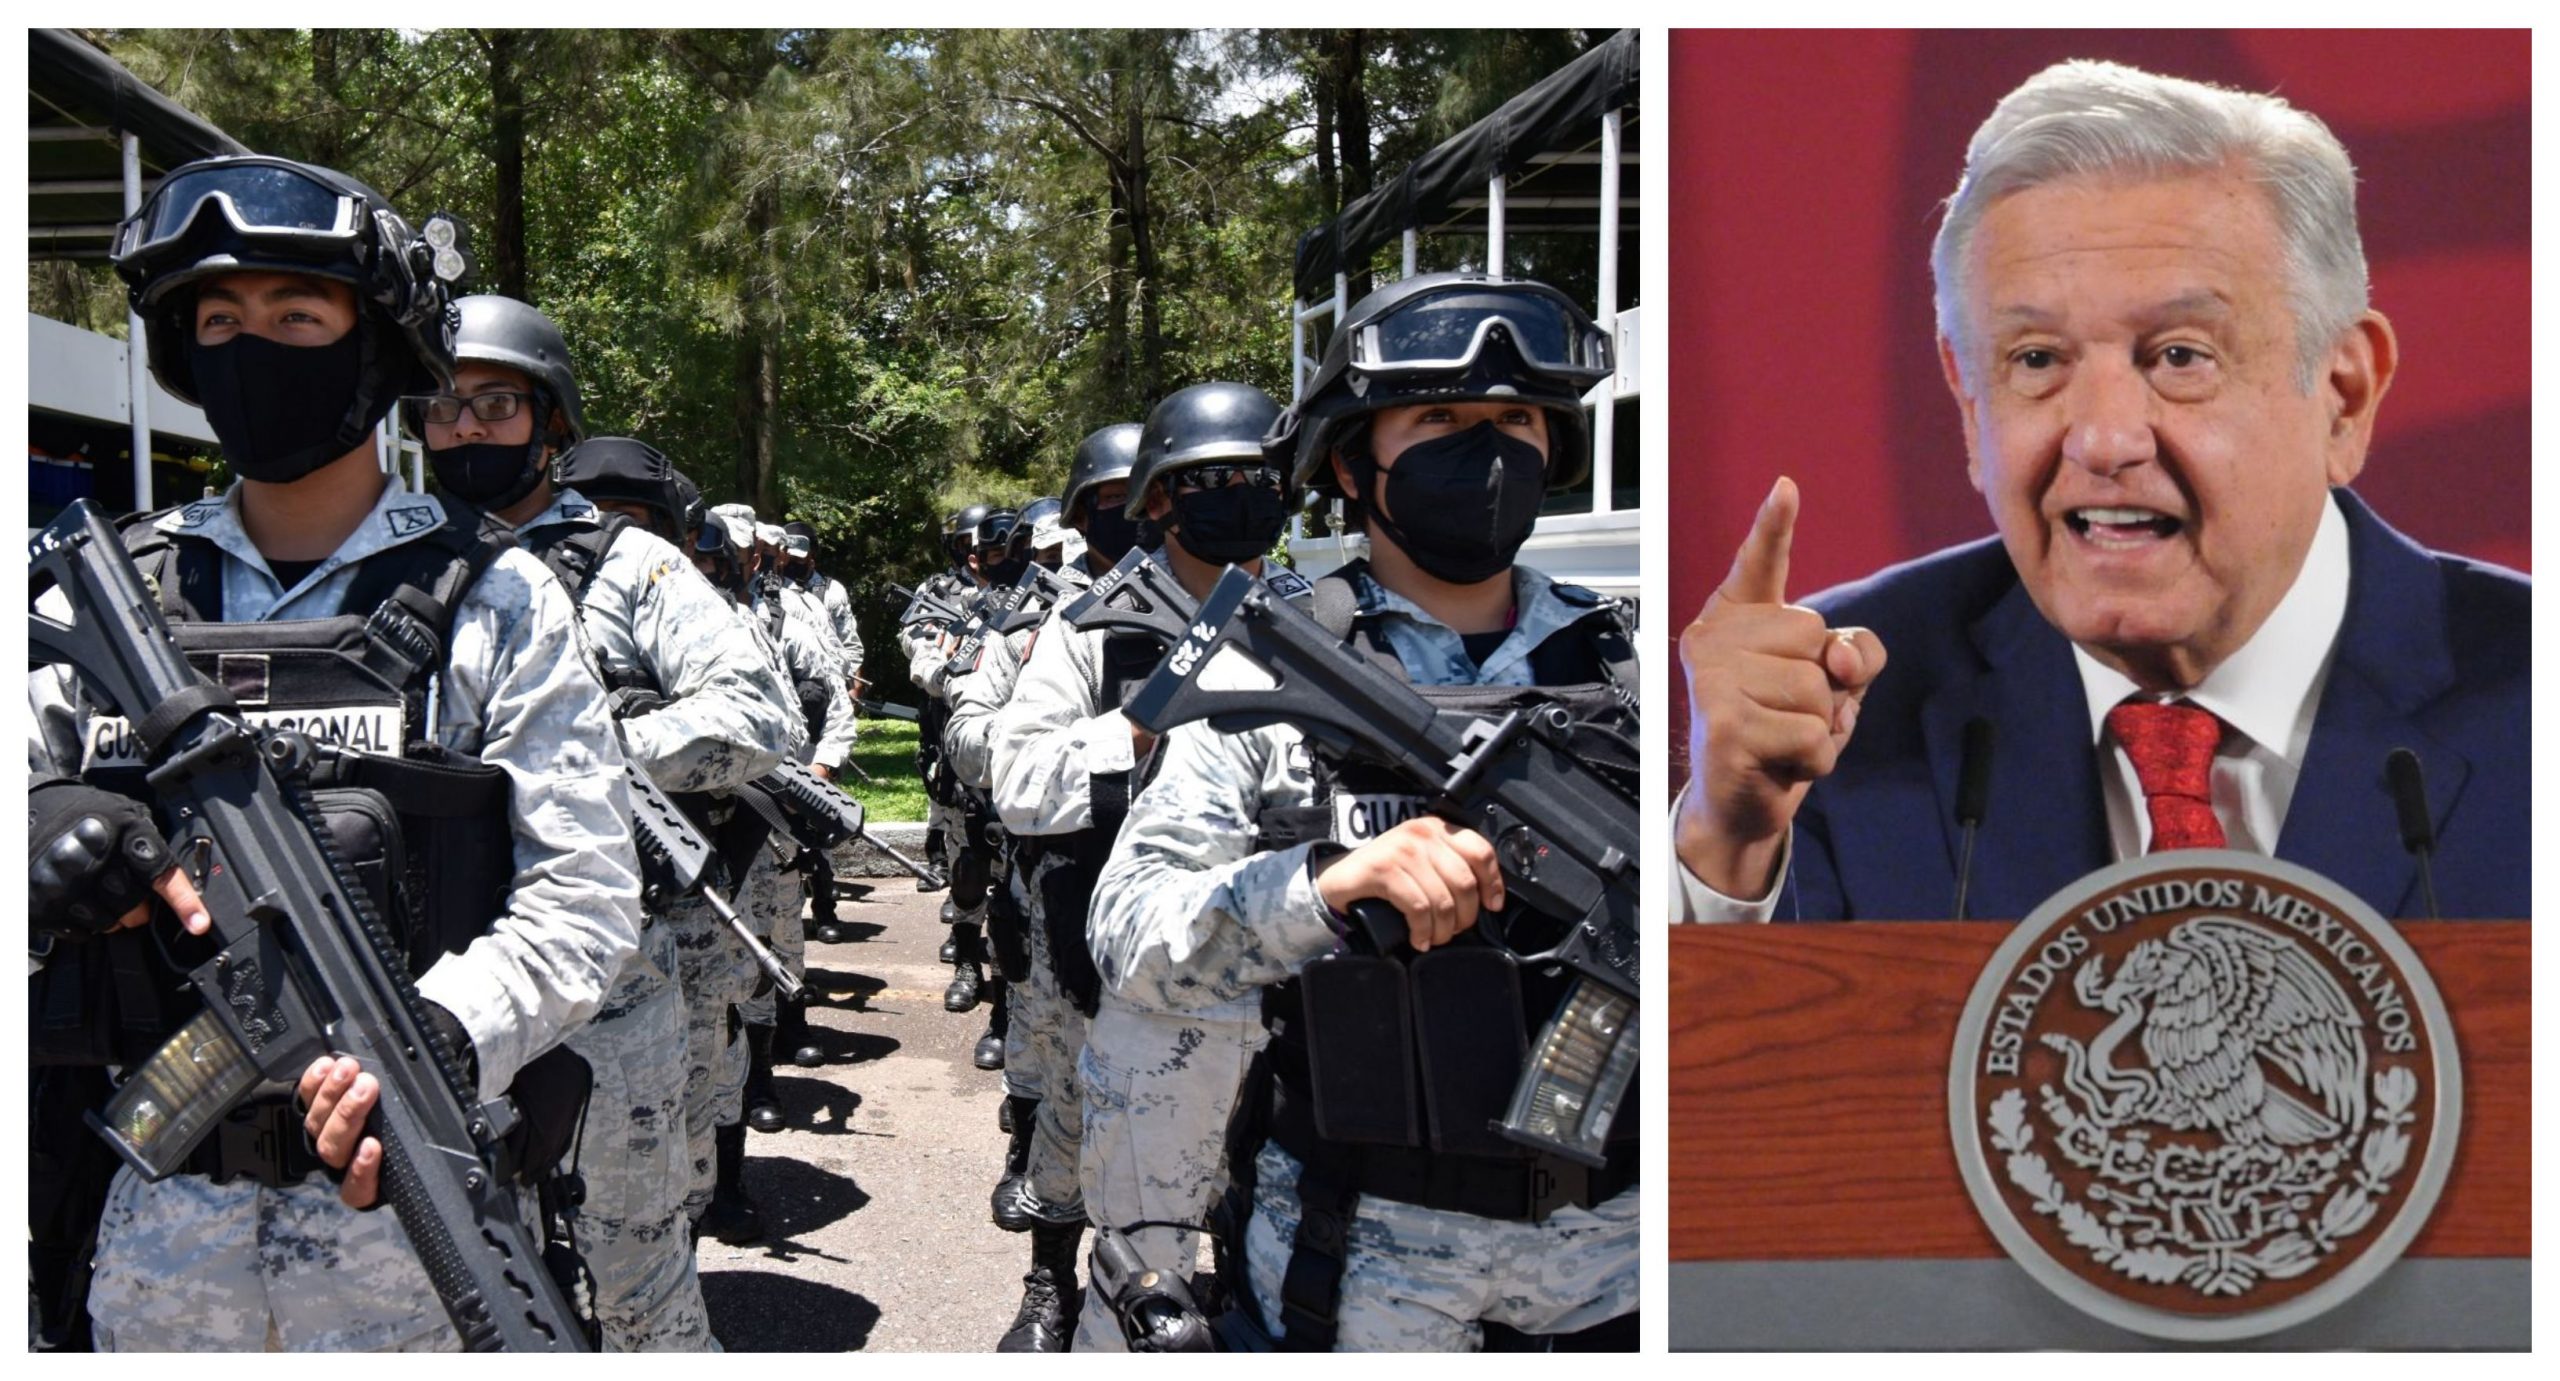 AMLO says National Guard is civilian, though it's military-led